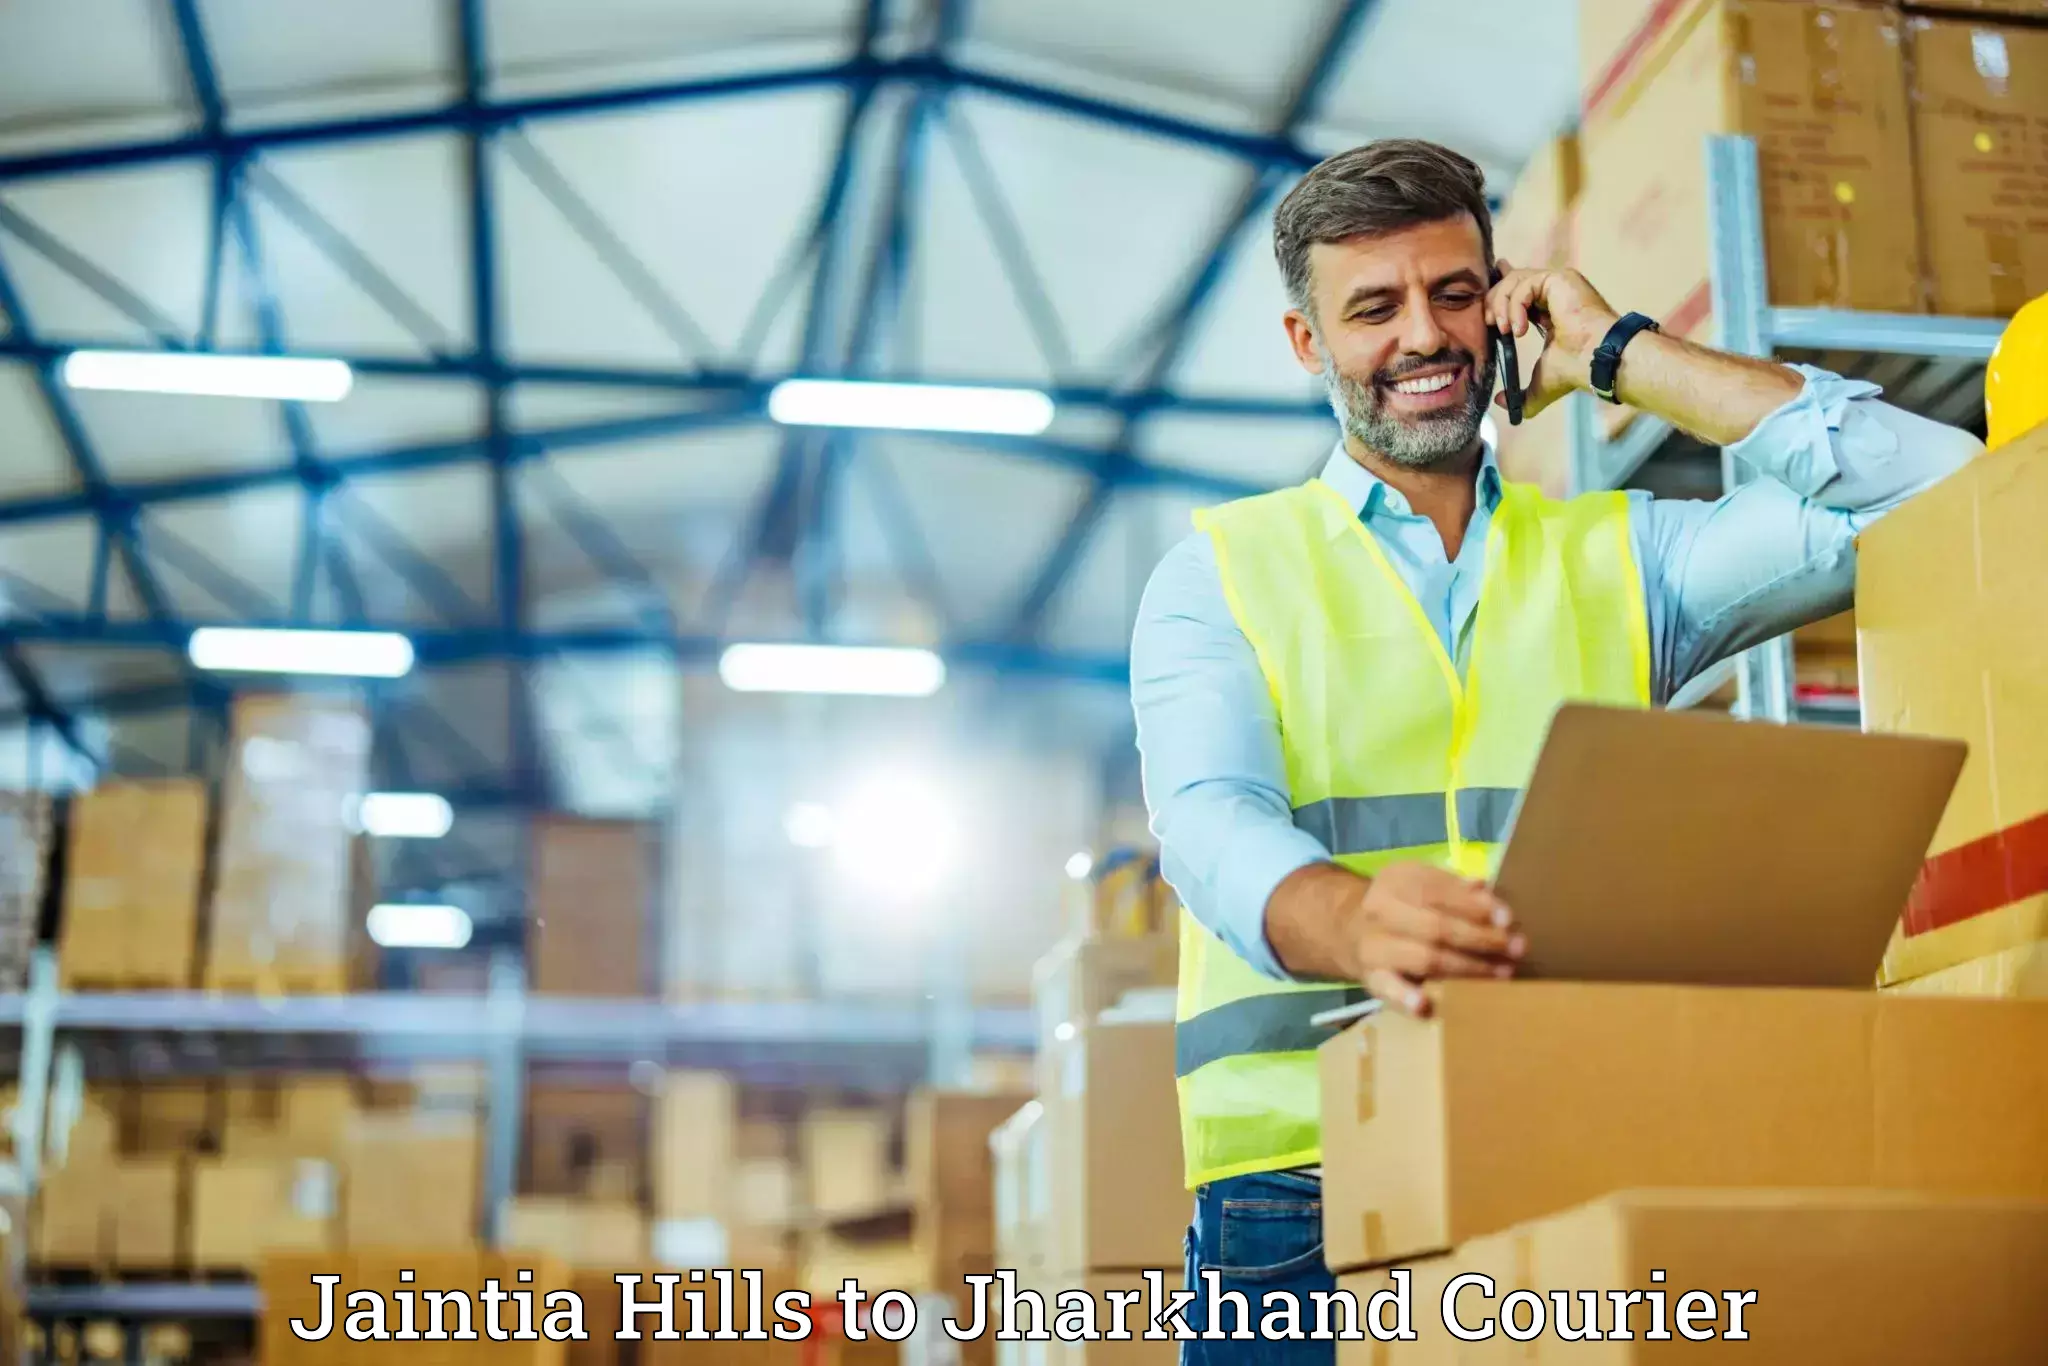 Household moving experts Jaintia Hills to Dhanbad